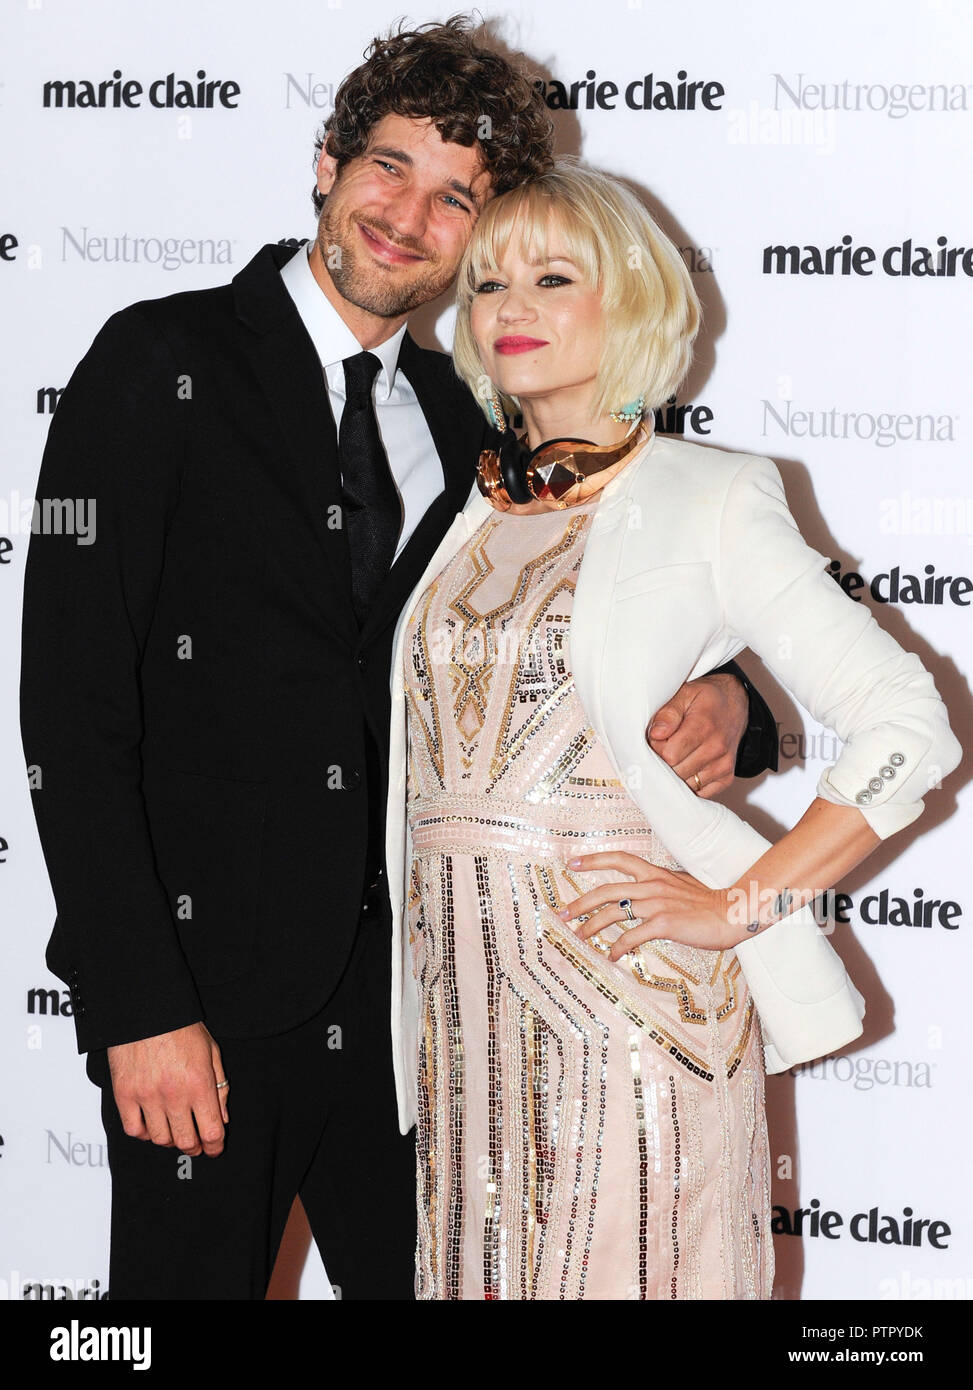 Photo Must Be Credited ©Alpha Press 080011 09/10/2018 Max Rogers and Kimberly Wyatt at the Marie Claire Future Shapers Awards 2018 held at Principal London in Russell Square, London. Stock Photo